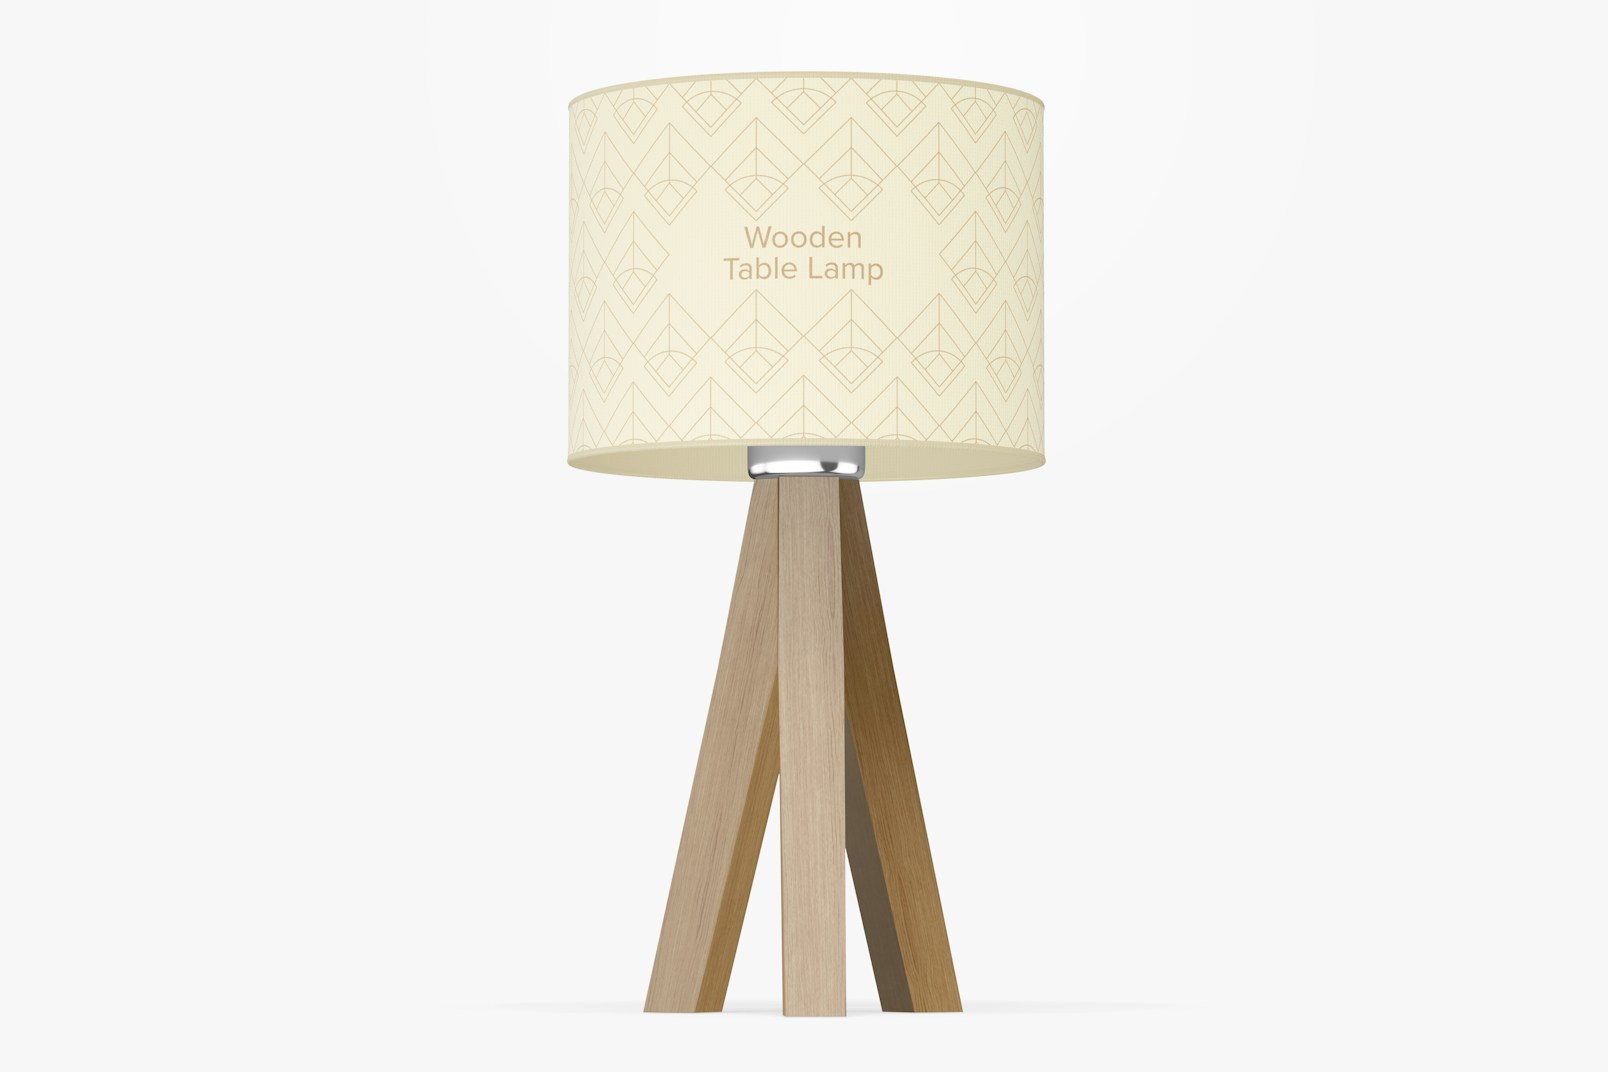 Wooden Table Lamp Mockup, Front View